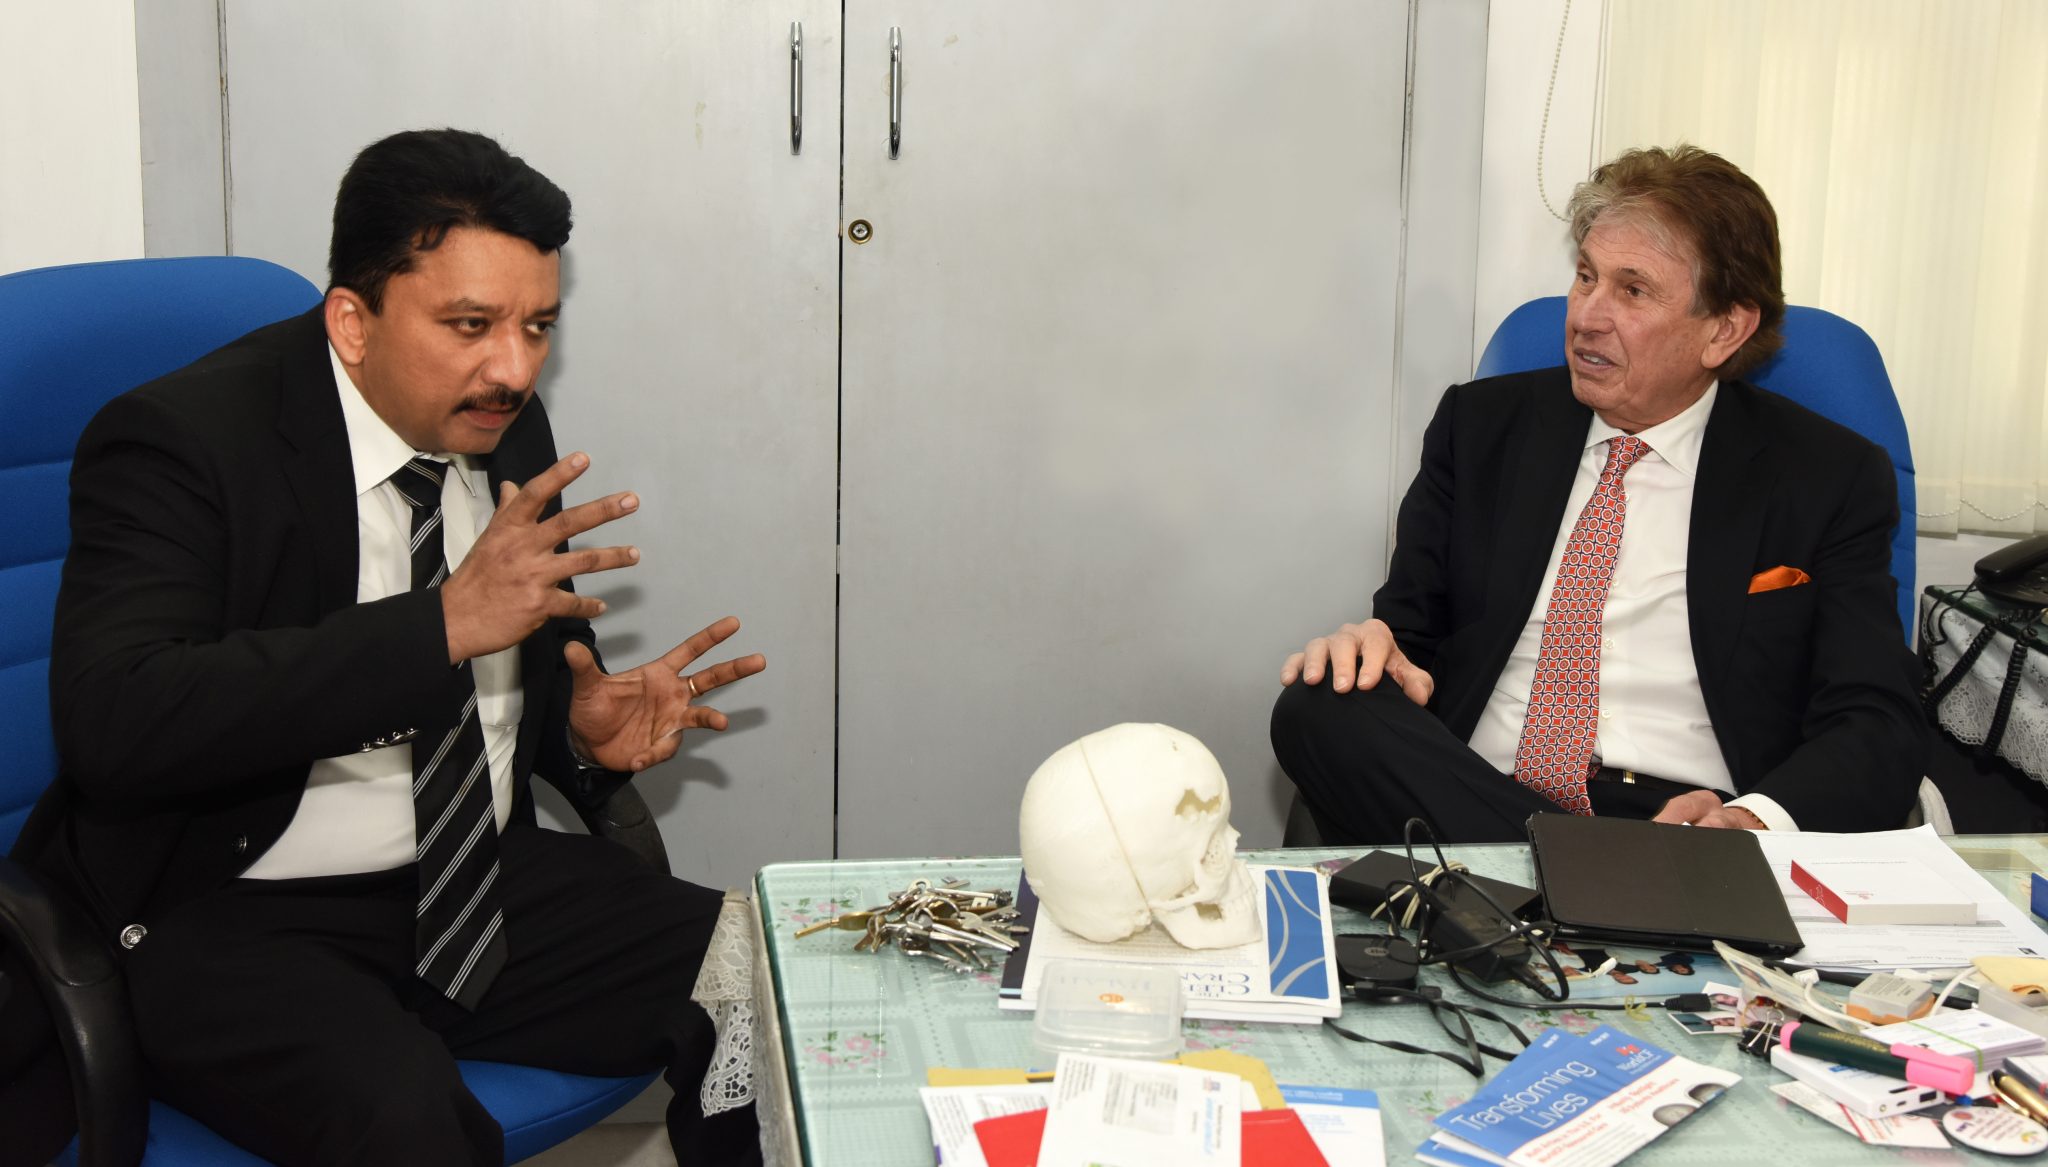 Dr. S.M. Balaji and Dr. Kenneth Salyer